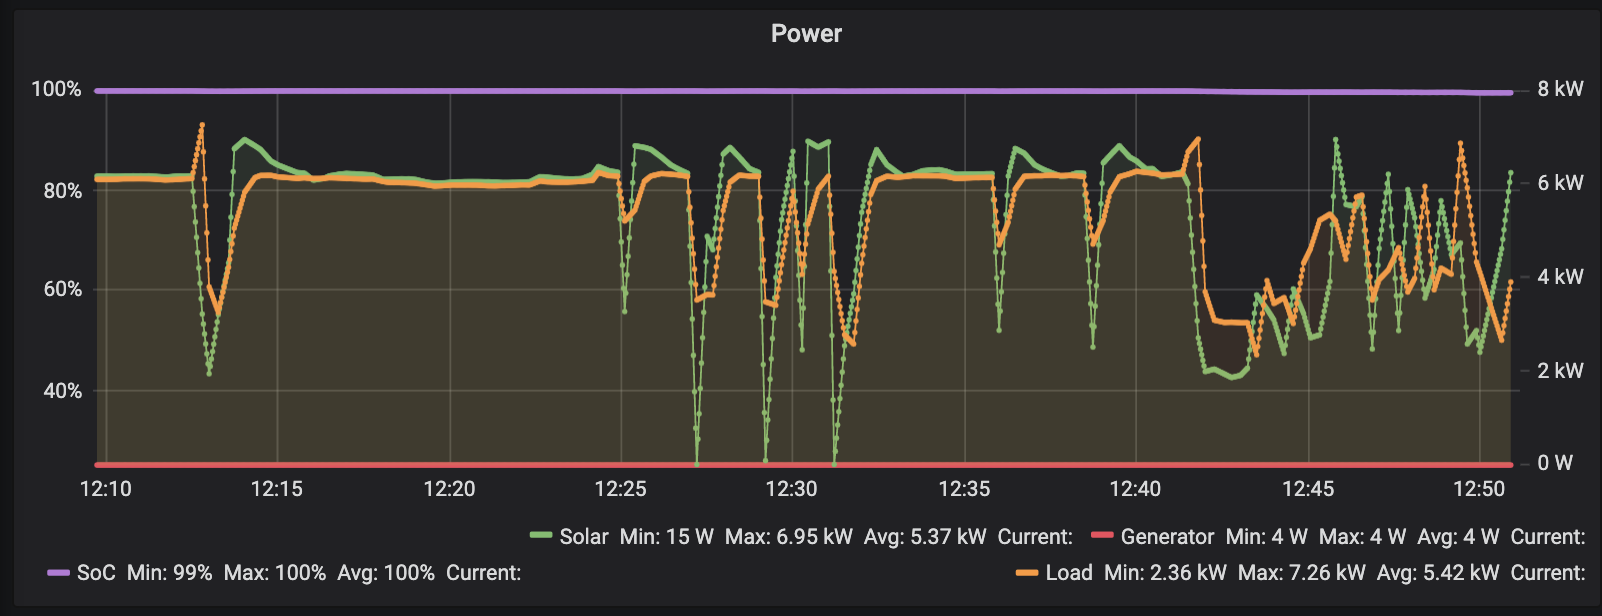 Graph of Solar and Load power